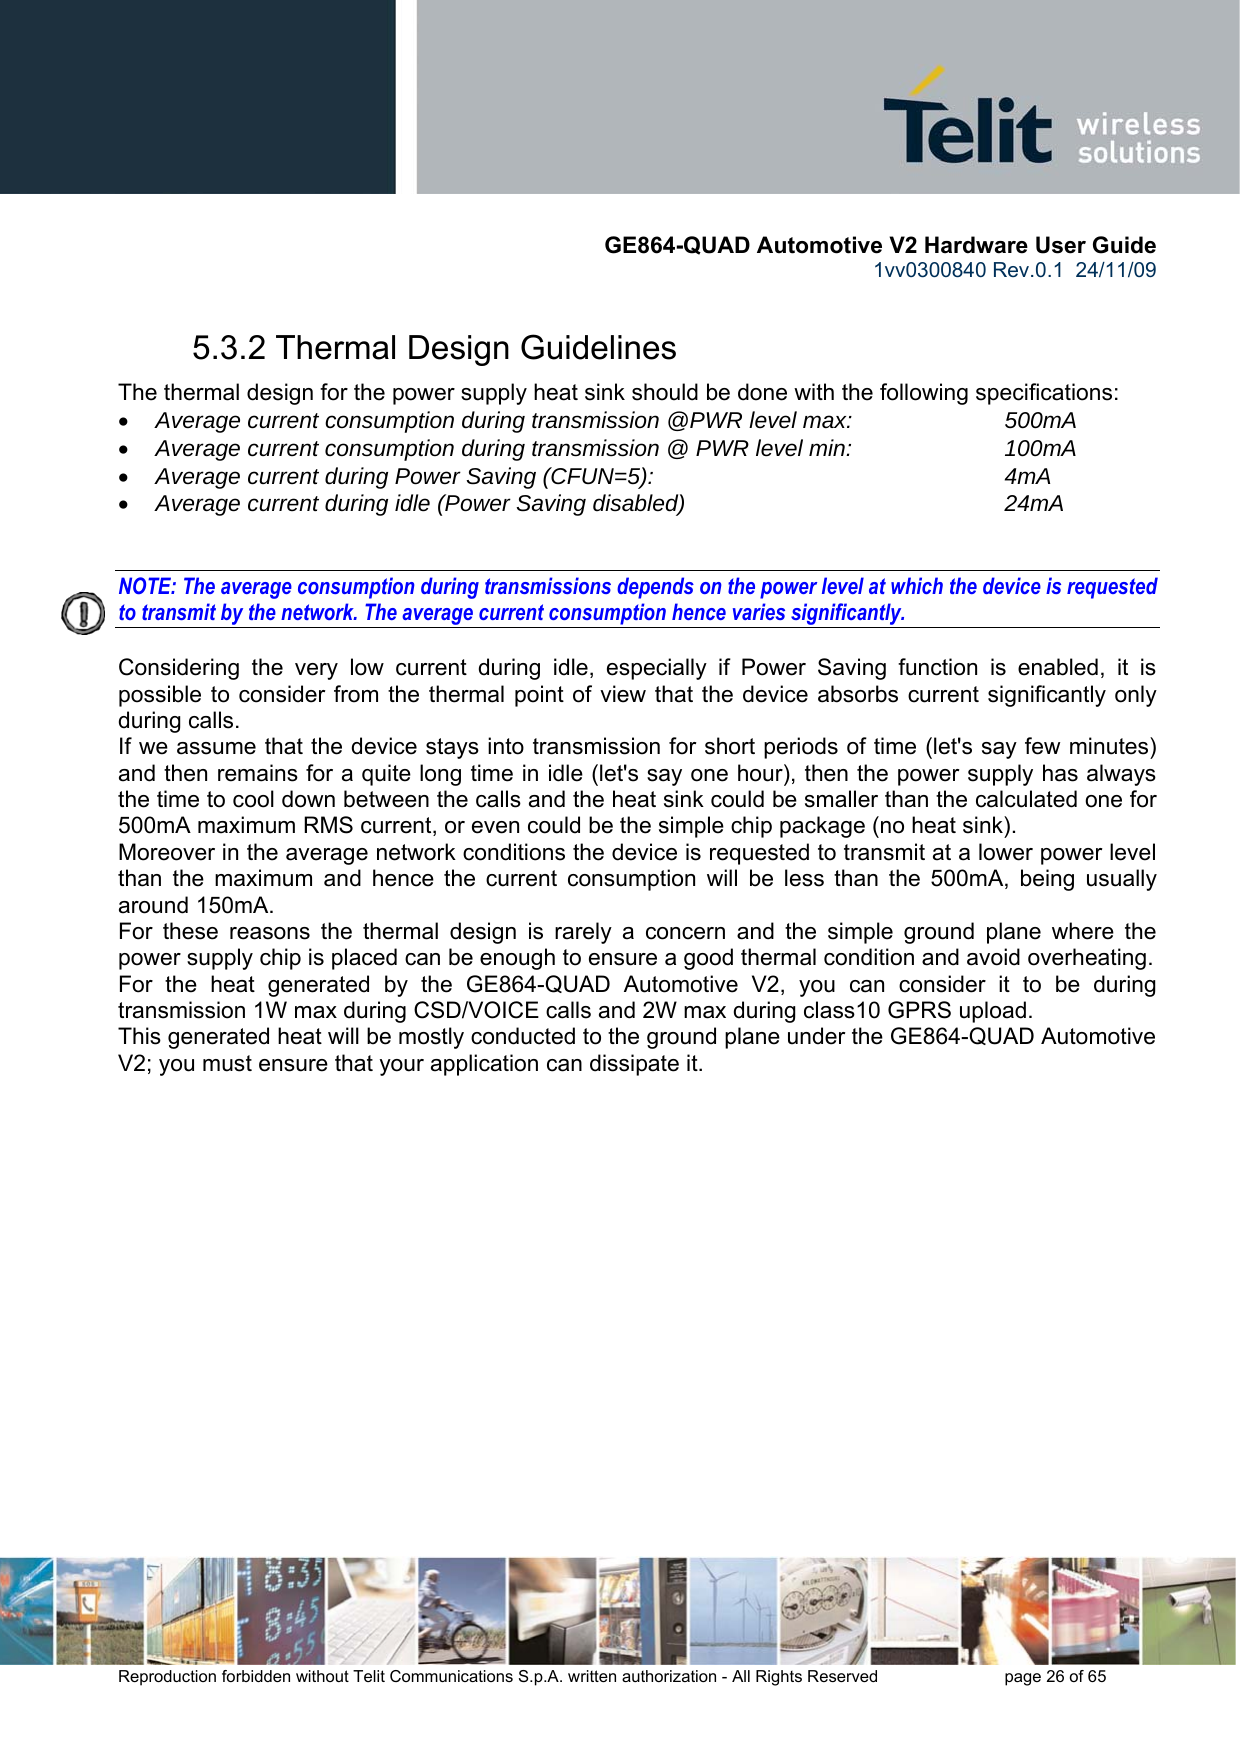       GE864-QUAD Automotive V2 Hardware User Guide 1vv0300840 Rev.0.1  24/11/09      Reproduction forbidden without Telit Communications S.p.A. written authorization - All Rights Reserved    page 26 of 65  5.3.2 Thermal Design Guidelines The thermal design for the power supply heat sink should be done with the following specifications: • Average current consumption during transmission @PWR level max:    500mA • Average current consumption during transmission @ PWR level min:    100mA  • Average current during Power Saving (CFUN=5):         4mA • Average current during idle (Power Saving disabled)        24mA   NOTE: The average consumption during transmissions depends on the power level at which the device is requested to transmit by the network. The average current consumption hence varies significantly.  Considering the very low current during idle, especially if Power Saving function is enabled, it is possible to consider from the thermal point of view that the device absorbs current significantly only during calls.  If we assume that the device stays into transmission for short periods of time (let&apos;s say few minutes) and then remains for a quite long time in idle (let&apos;s say one hour), then the power supply has always the time to cool down between the calls and the heat sink could be smaller than the calculated one for 500mA maximum RMS current, or even could be the simple chip package (no heat sink). Moreover in the average network conditions the device is requested to transmit at a lower power level than the maximum and hence the current consumption will be less than the 500mA, being usually around 150mA. For these reasons the thermal design is rarely a concern and the simple ground plane where the power supply chip is placed can be enough to ensure a good thermal condition and avoid overheating.  For the heat generated by the GE864-QUAD Automotive V2, you can consider it to be during transmission 1W max during CSD/VOICE calls and 2W max during class10 GPRS upload.  This generated heat will be mostly conducted to the ground plane under the GE864-QUAD Automotive V2; you must ensure that your application can dissipate it.  